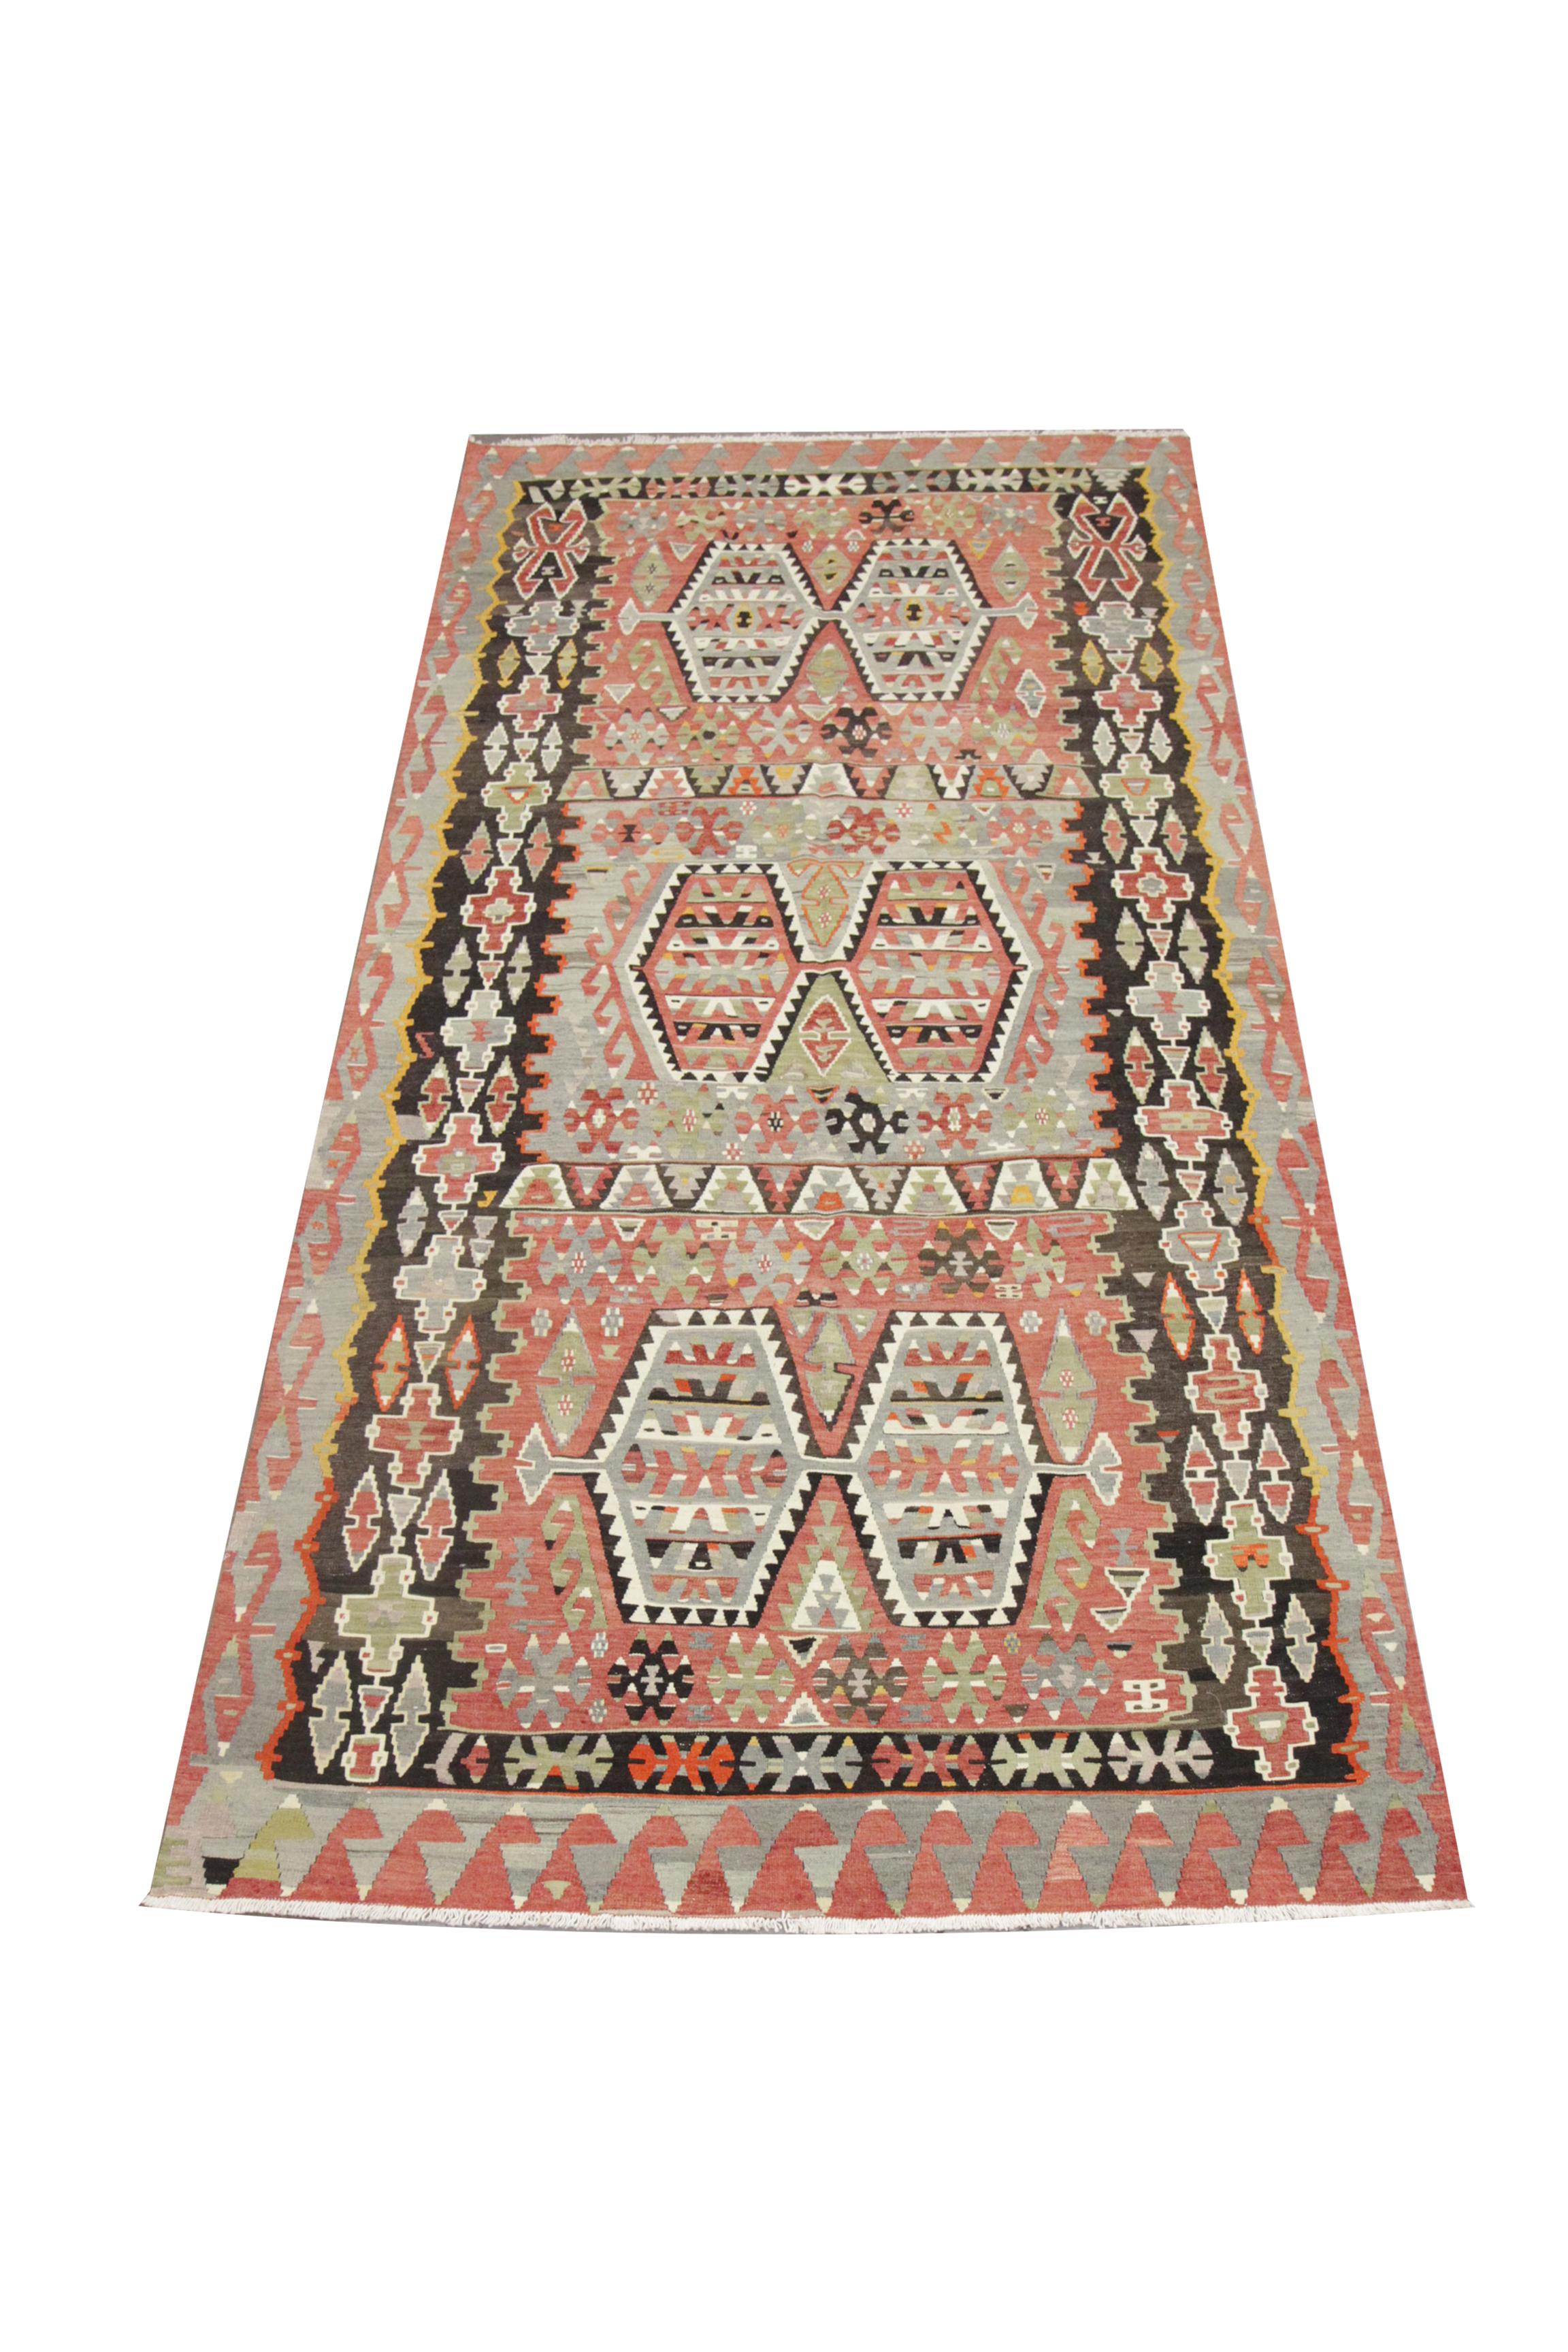 This fantastic Turkish Kilim was woven in the 20th Century and features a beautiful tribal design. Decorated with motifs and medallions which have been woven intricately, this piece is sure to make the perfect accent rug in any room. Guaranteed to